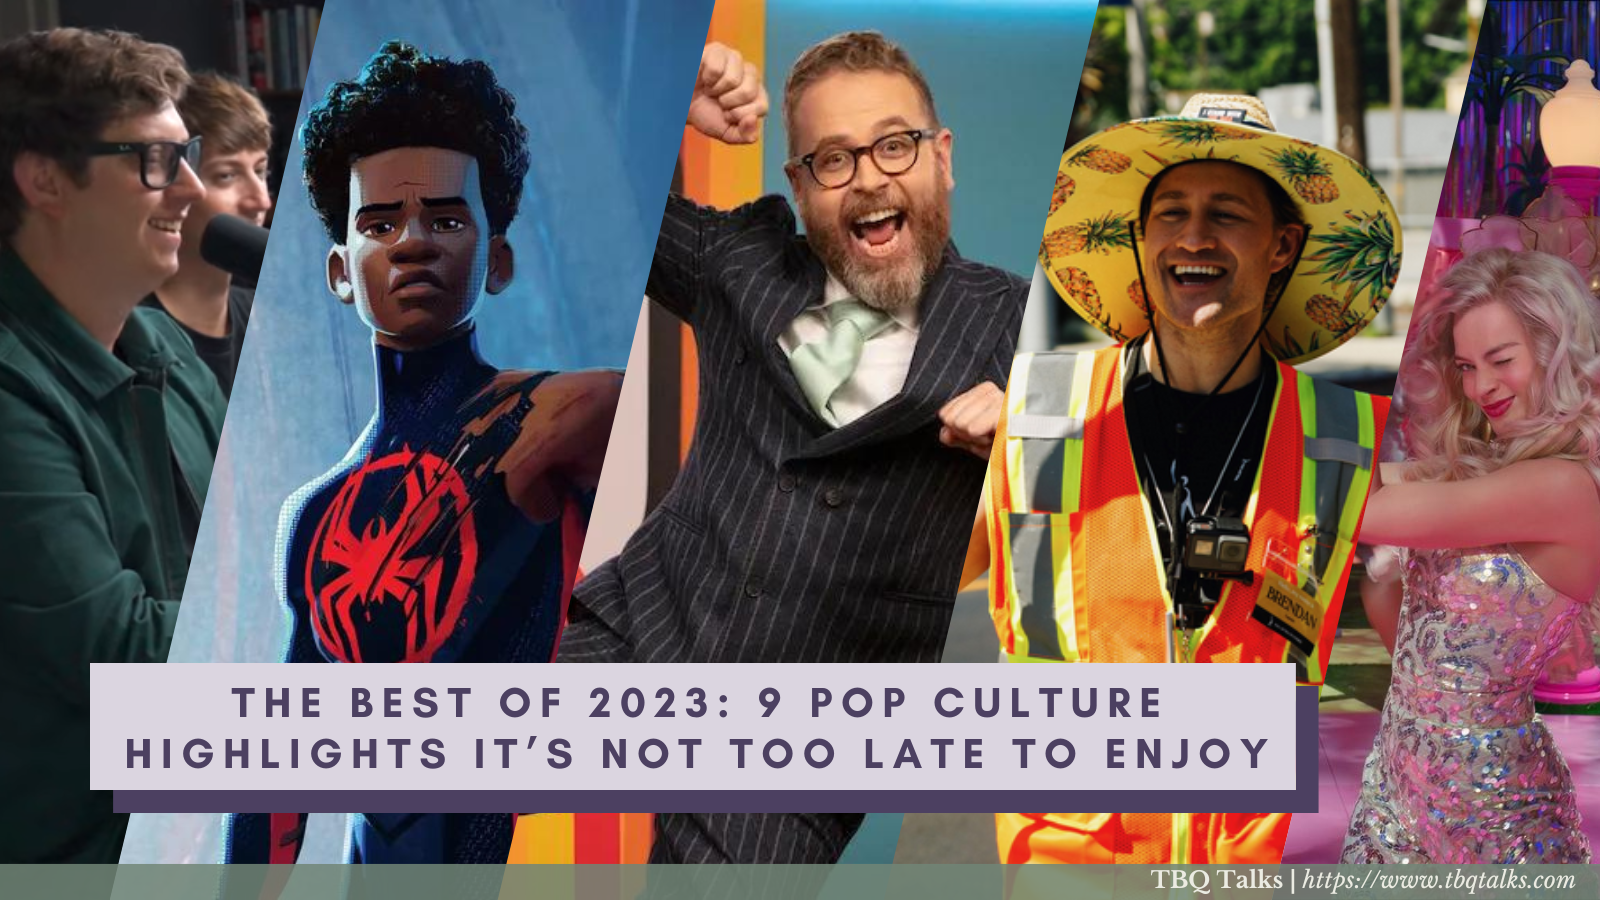 The Best of 2023: 9 Pop Culture Highlights It’s Not Too Late to Enjoy